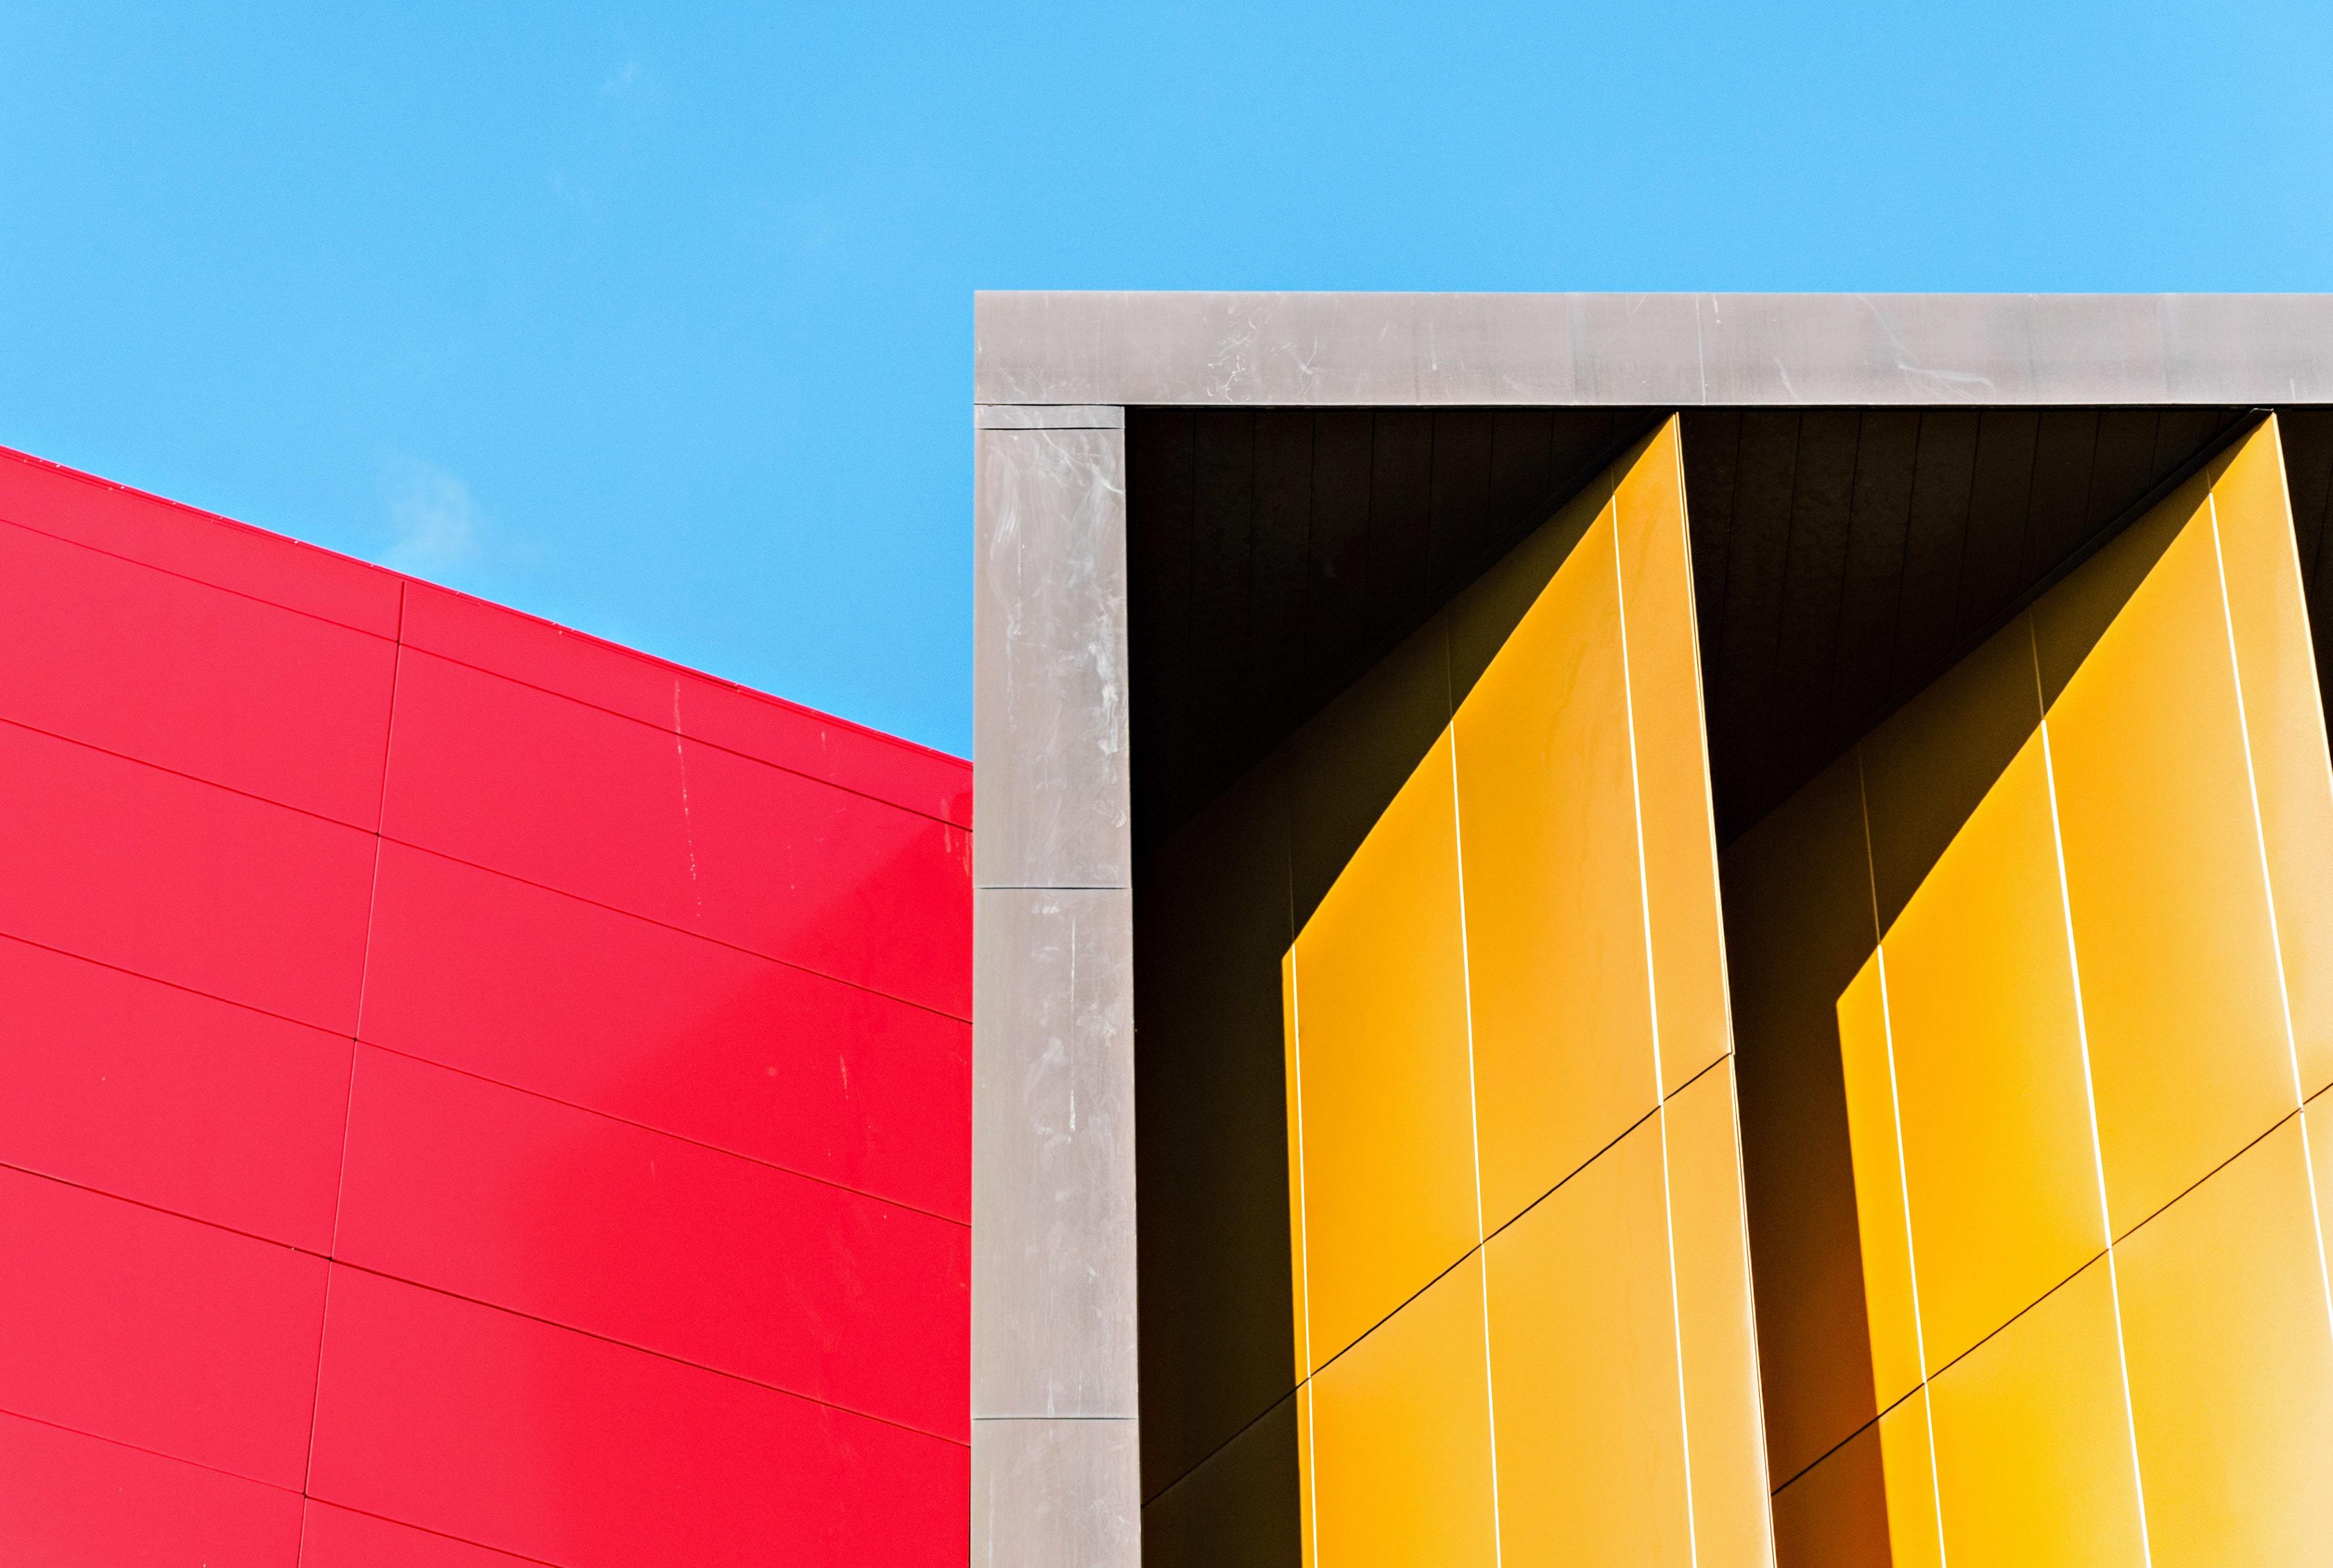 Red and yellow abstract loft architecture against blue sky